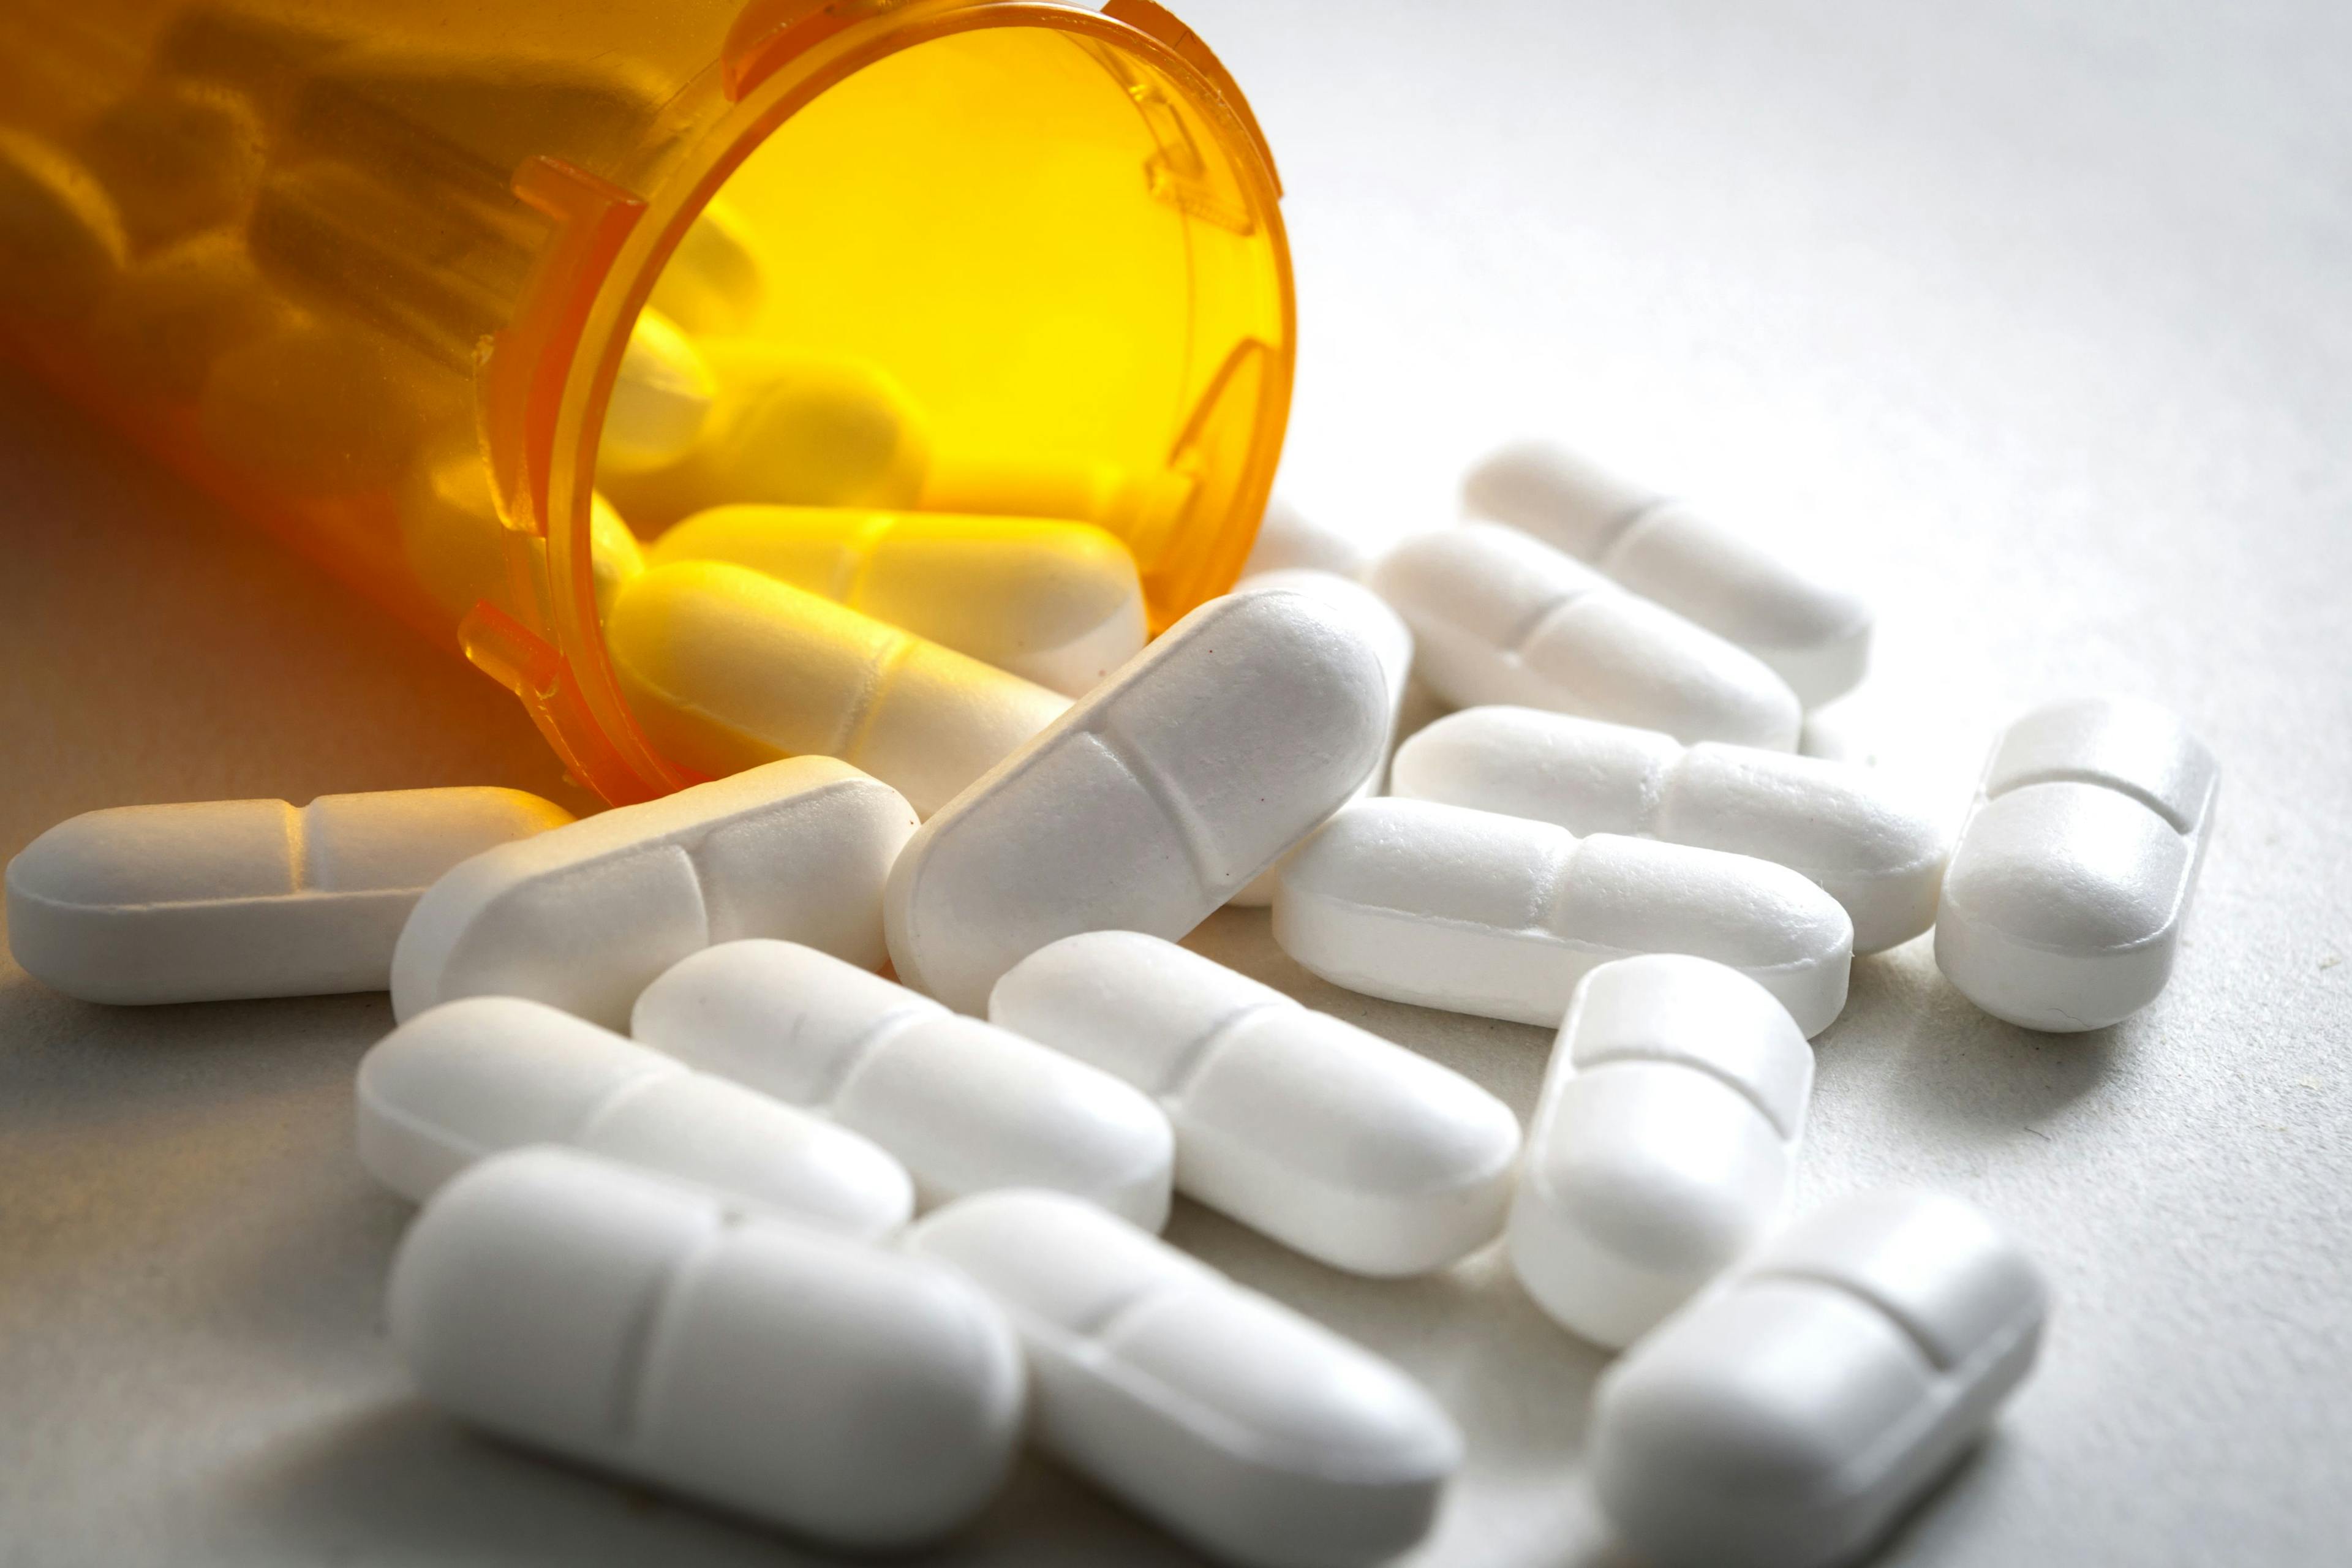 Study: Medicare Part D Coverage Favors Generic Drugs Over Branded Counterparts